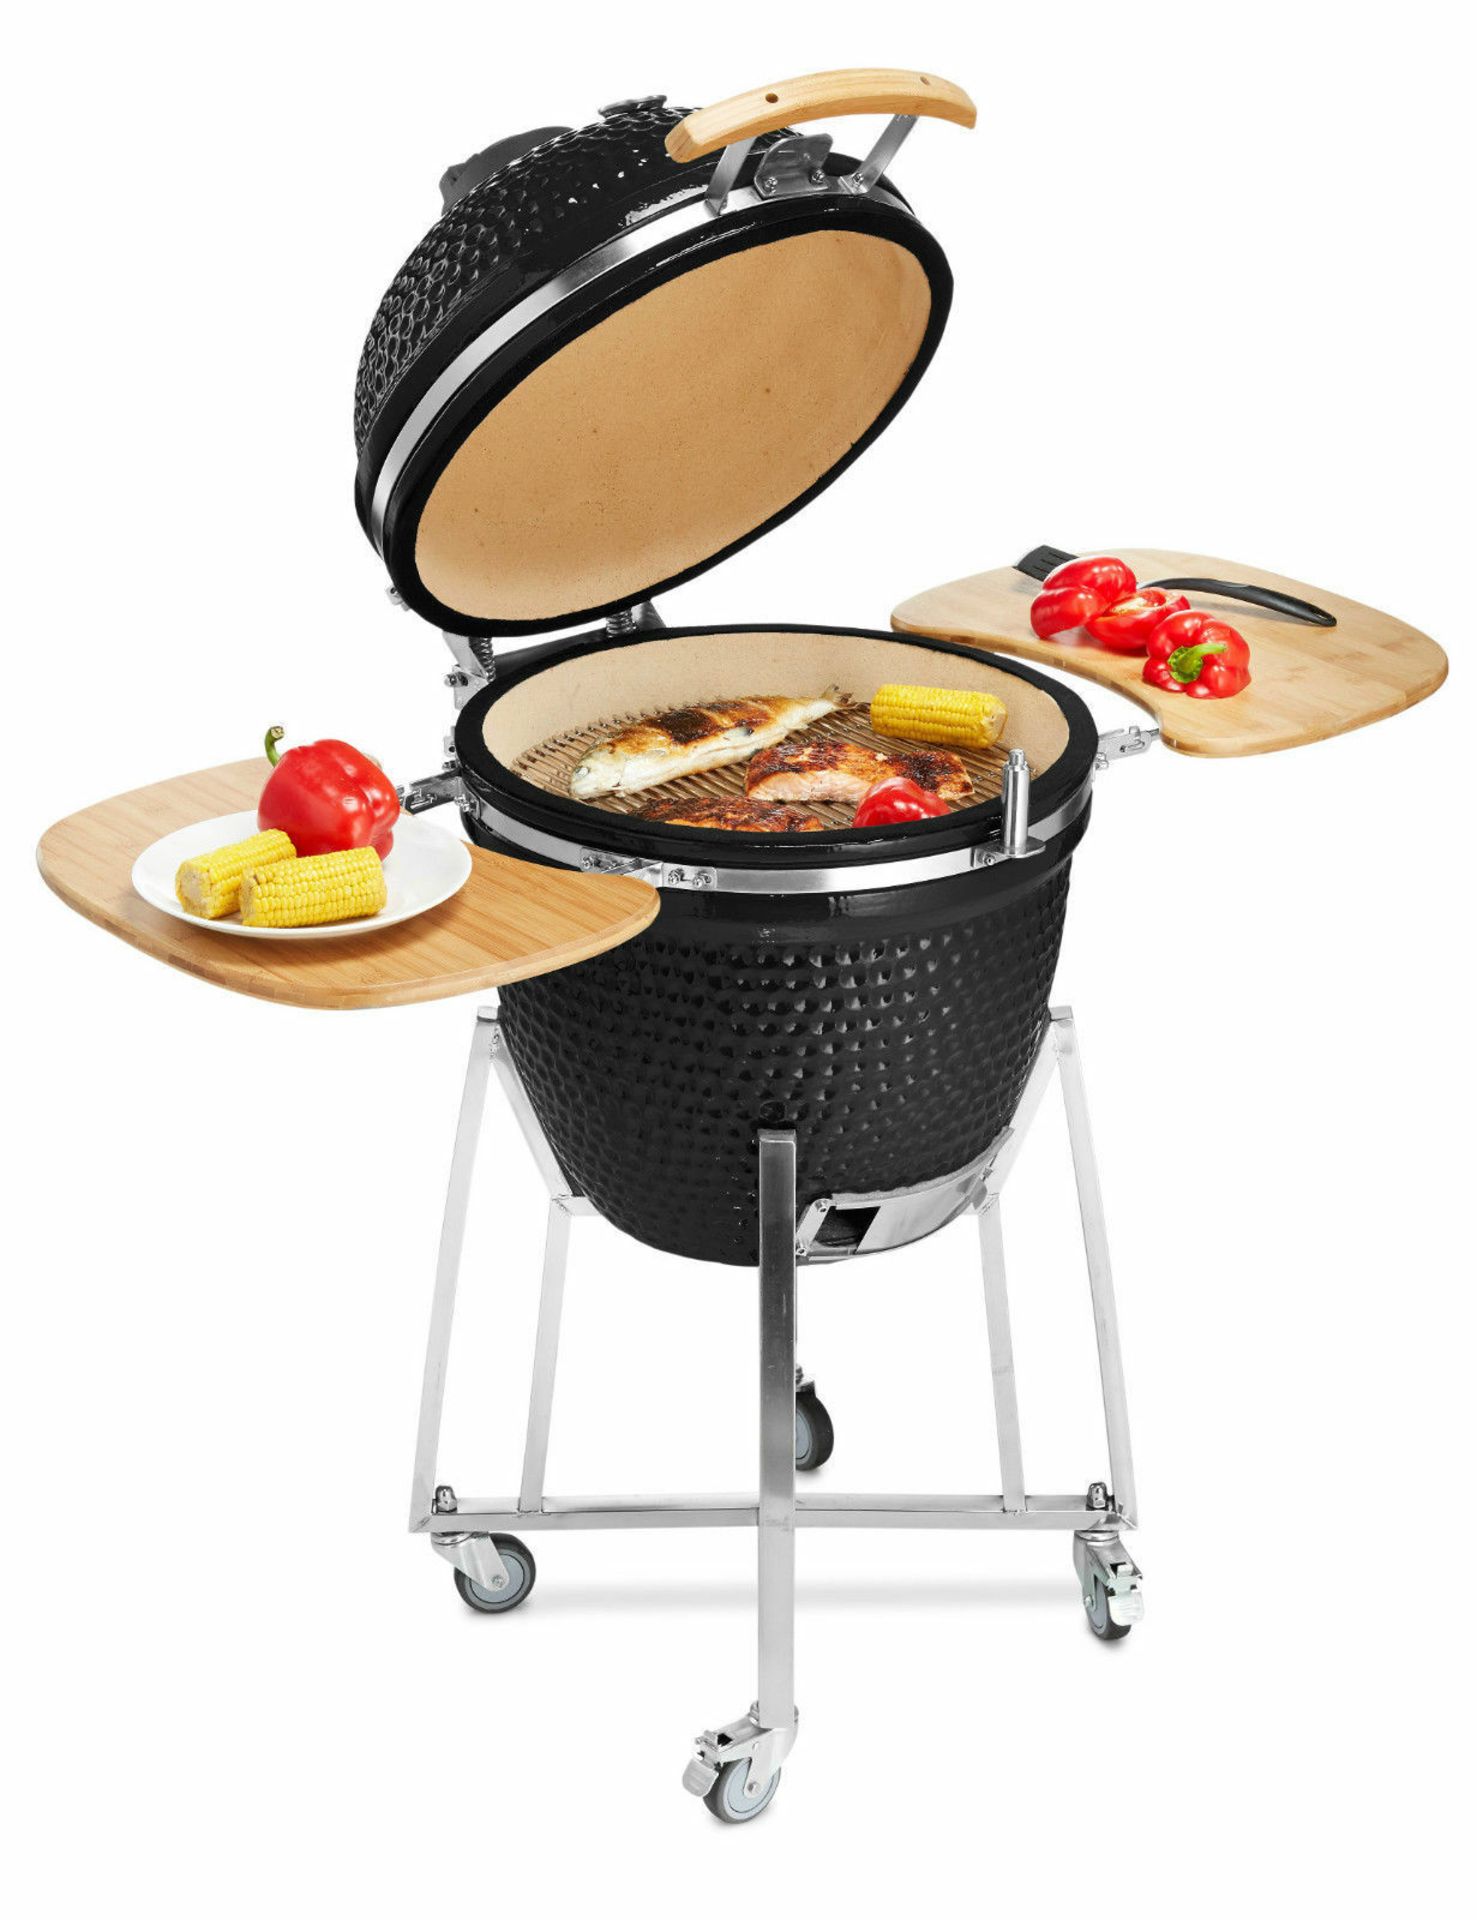 Summer is here! Brand new, 21" Ceramic Kamado BBQ Grill Smoker & Cooking Oven Charcoal Kettle Egg - Image 2 of 5